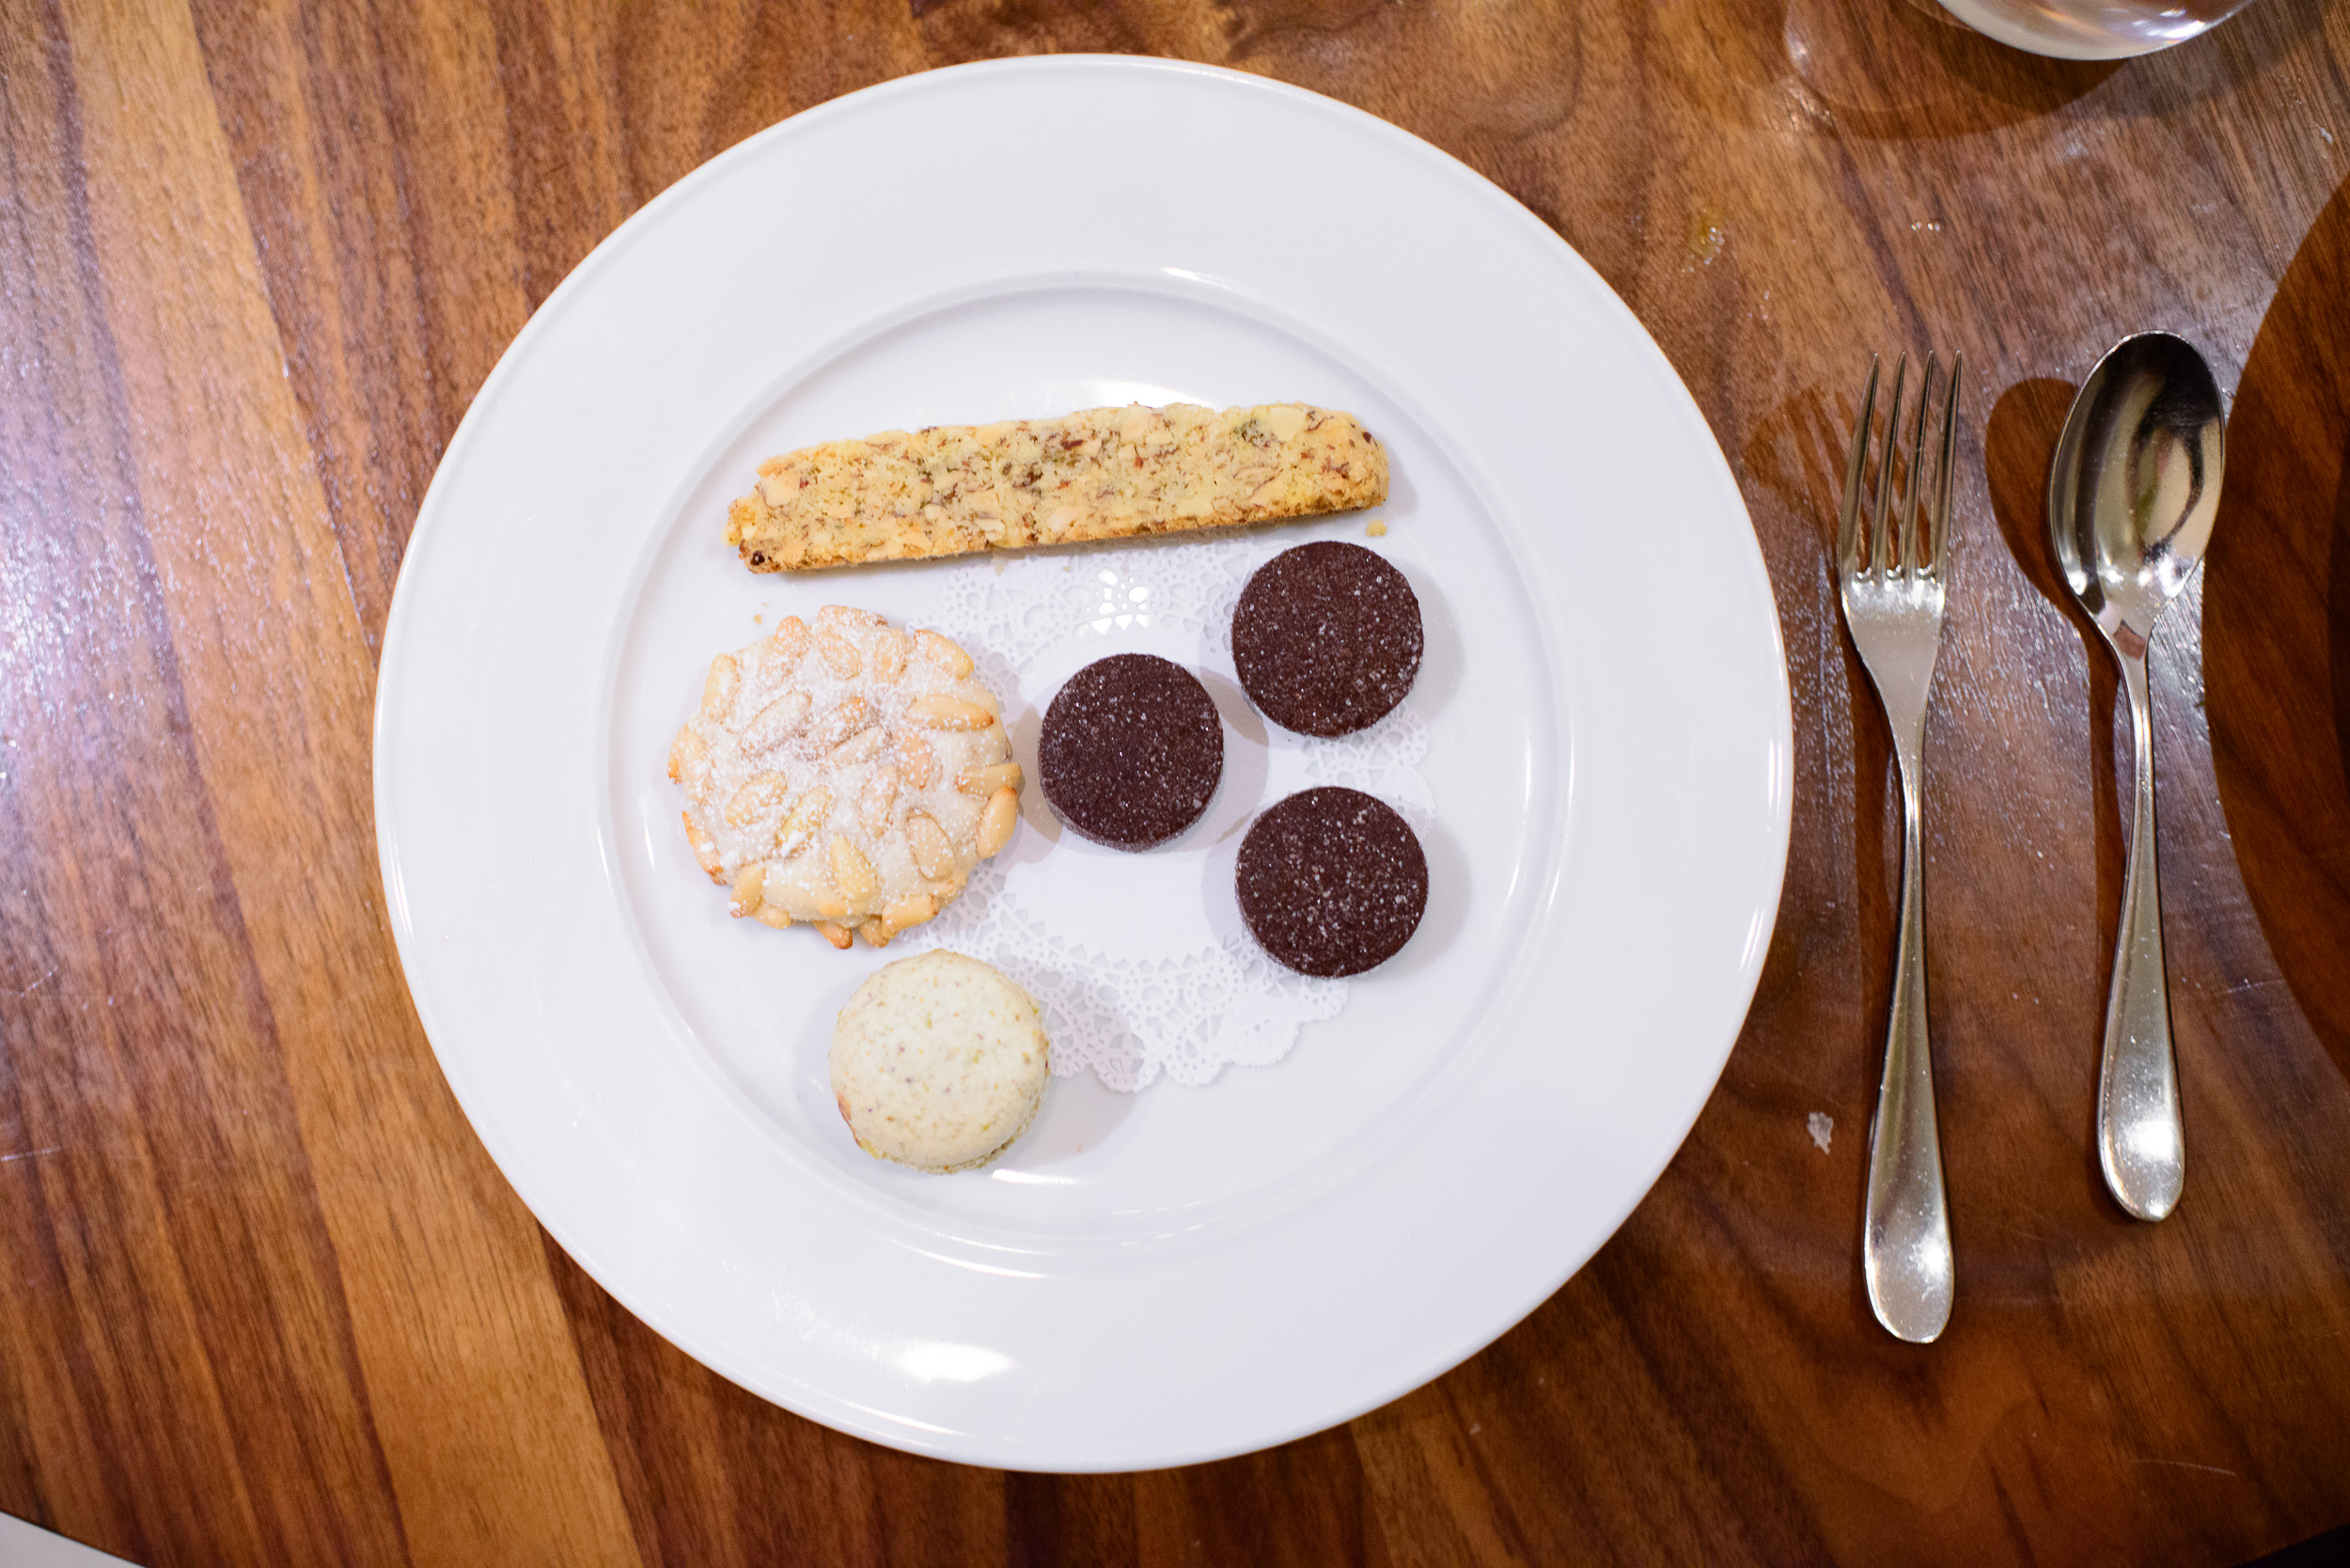 "Biscotti" - Almond anise, pignole, chocolate shortbread, and pi